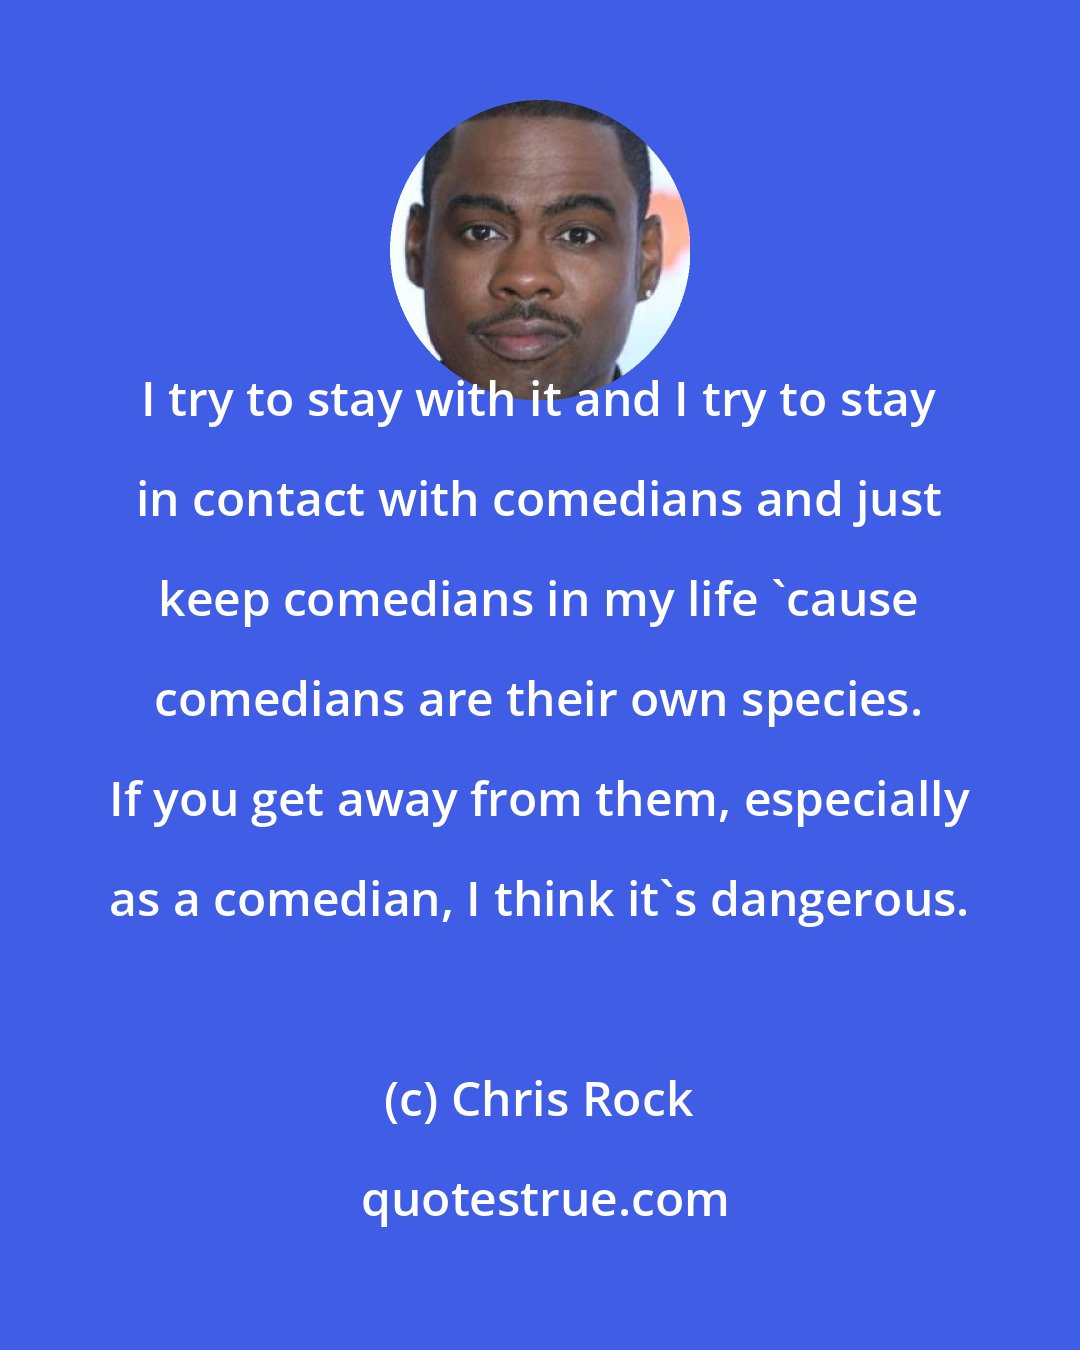 Chris Rock: I try to stay with it and I try to stay in contact with comedians and just keep comedians in my life 'cause comedians are their own species. If you get away from them, especially as a comedian, I think it's dangerous.